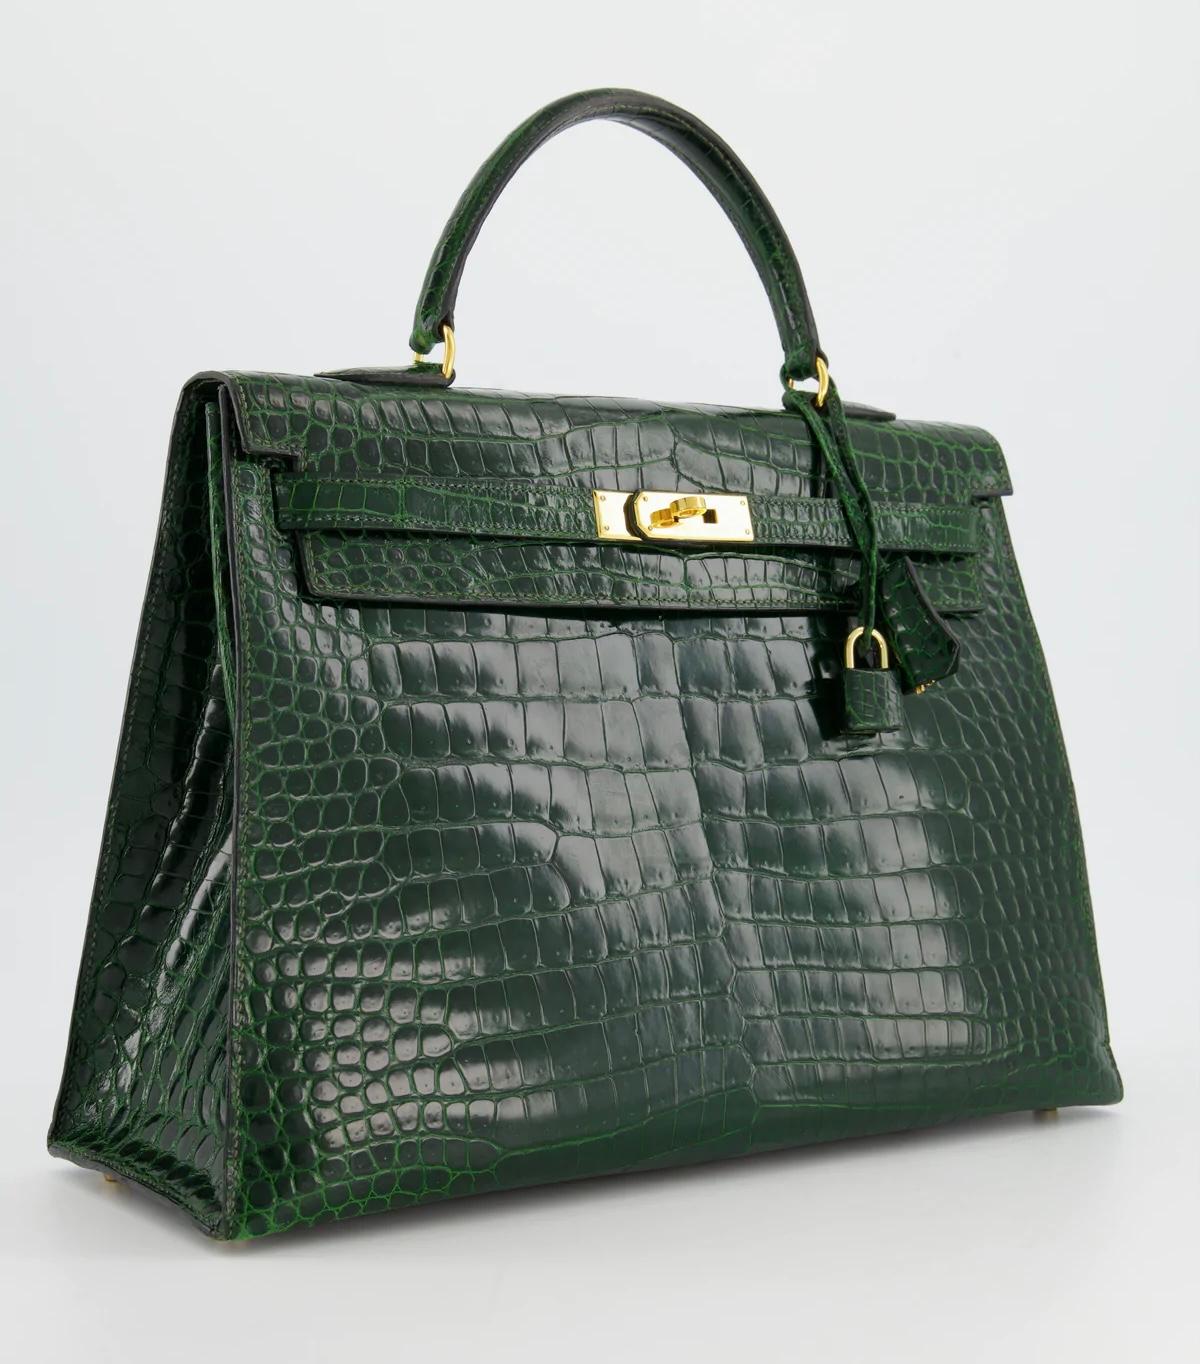 Hermes Kelly 35cm in Vert Fonce Crocodile Shiny Porosus with Gold Hardware

This bag is in very good condition with minor signs of wear to the corners.
Please see all of the photos for more information on this item
An absolutely incredible price for